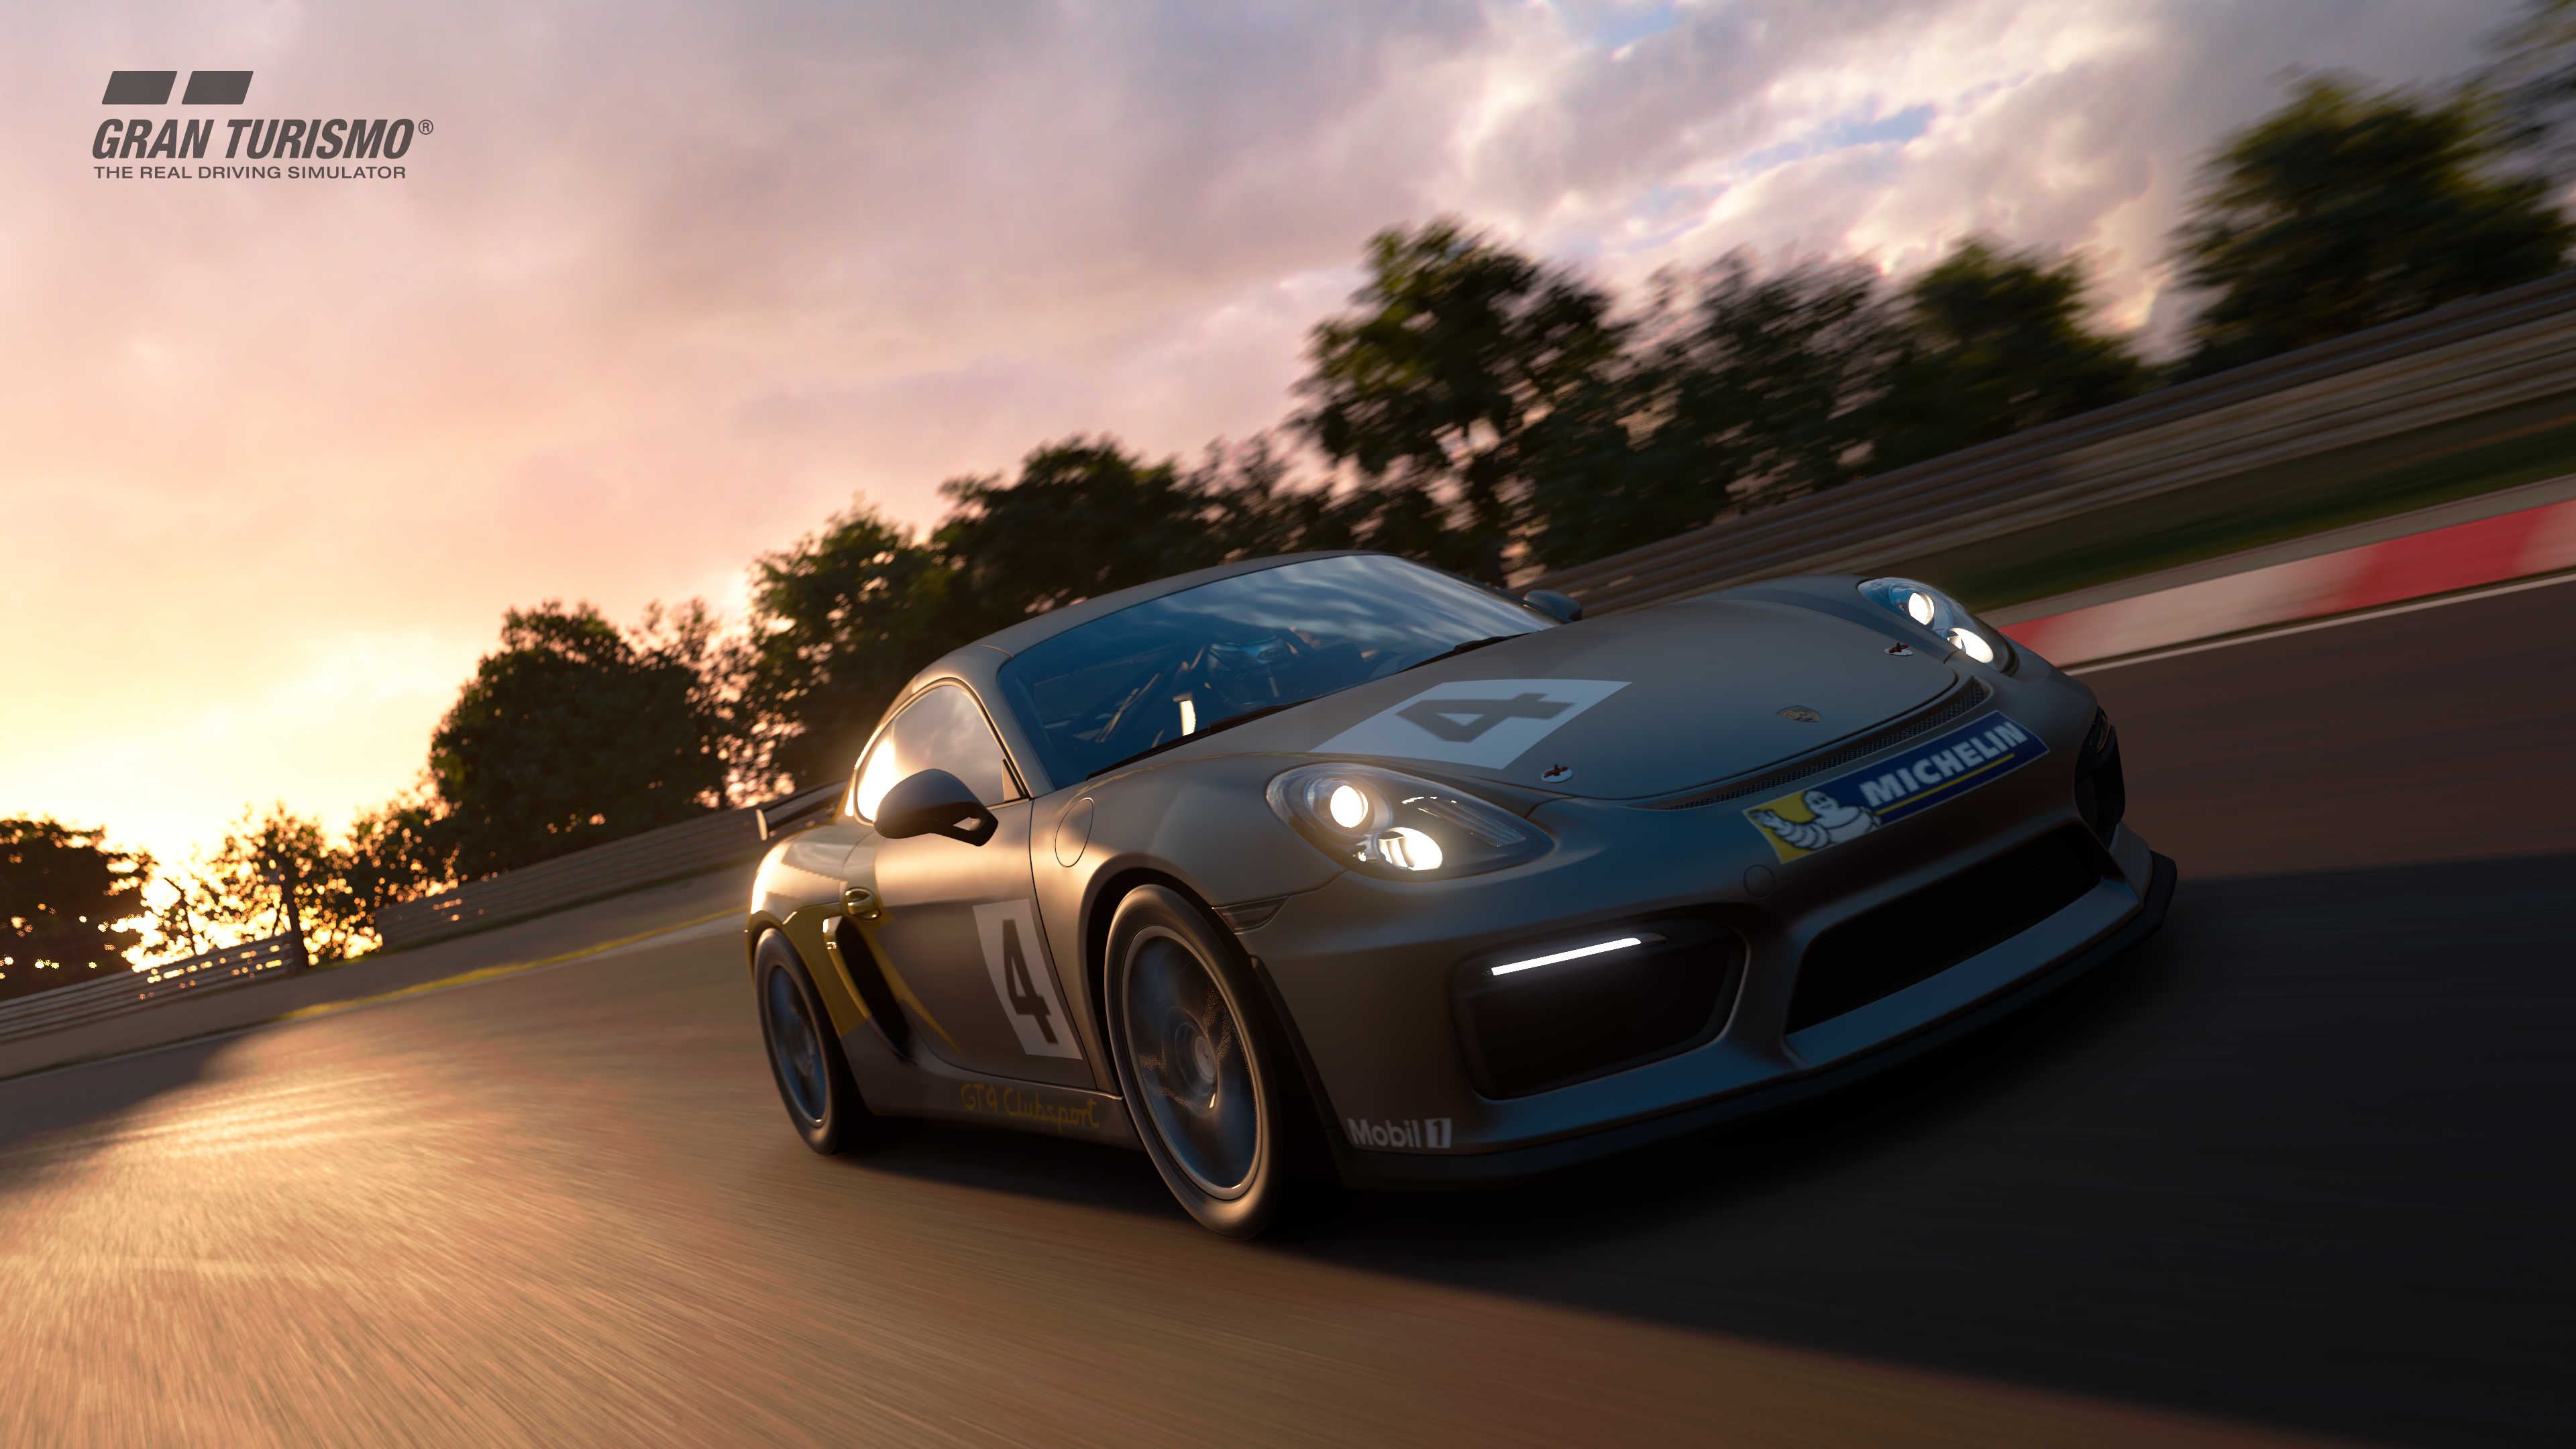 Image for Gran Turismo Sport car classes and full track list revealed ahead of demo